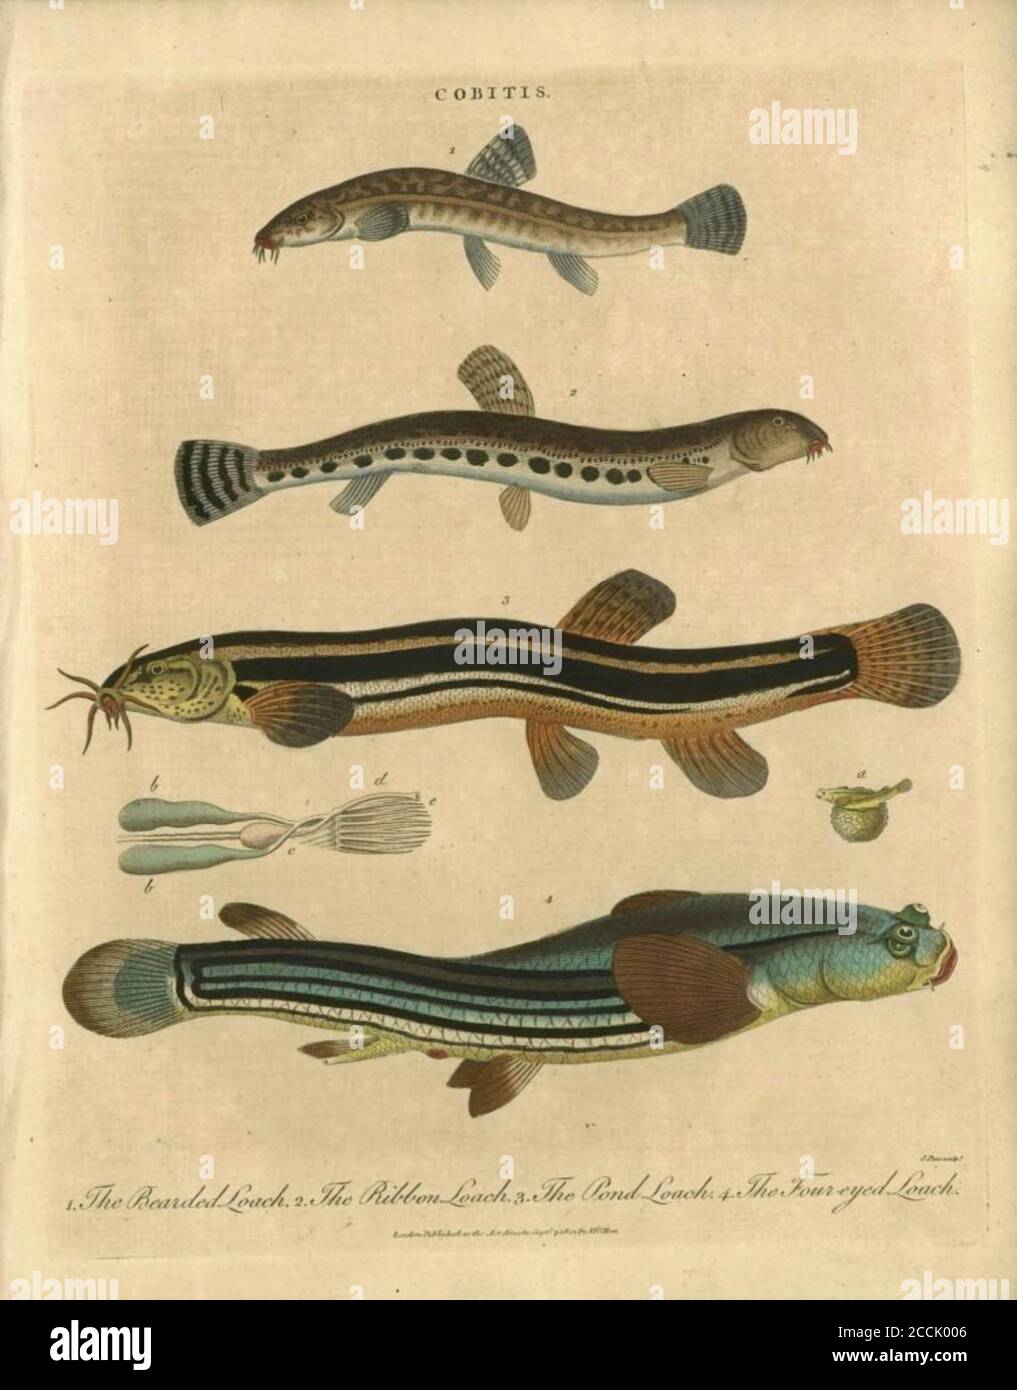 Cobitis Fresh water fish The Bearded Loach the Ribbon Loach the Pond Loach the Four-eyed Loach Handcolored copperplate engraving From the Encyclopaedia Londinensis or, Universal dictionary of arts, sciences, and literature; Volume IV;  Edited by Wilkes, John. Published in London in 1810 Stock Photo